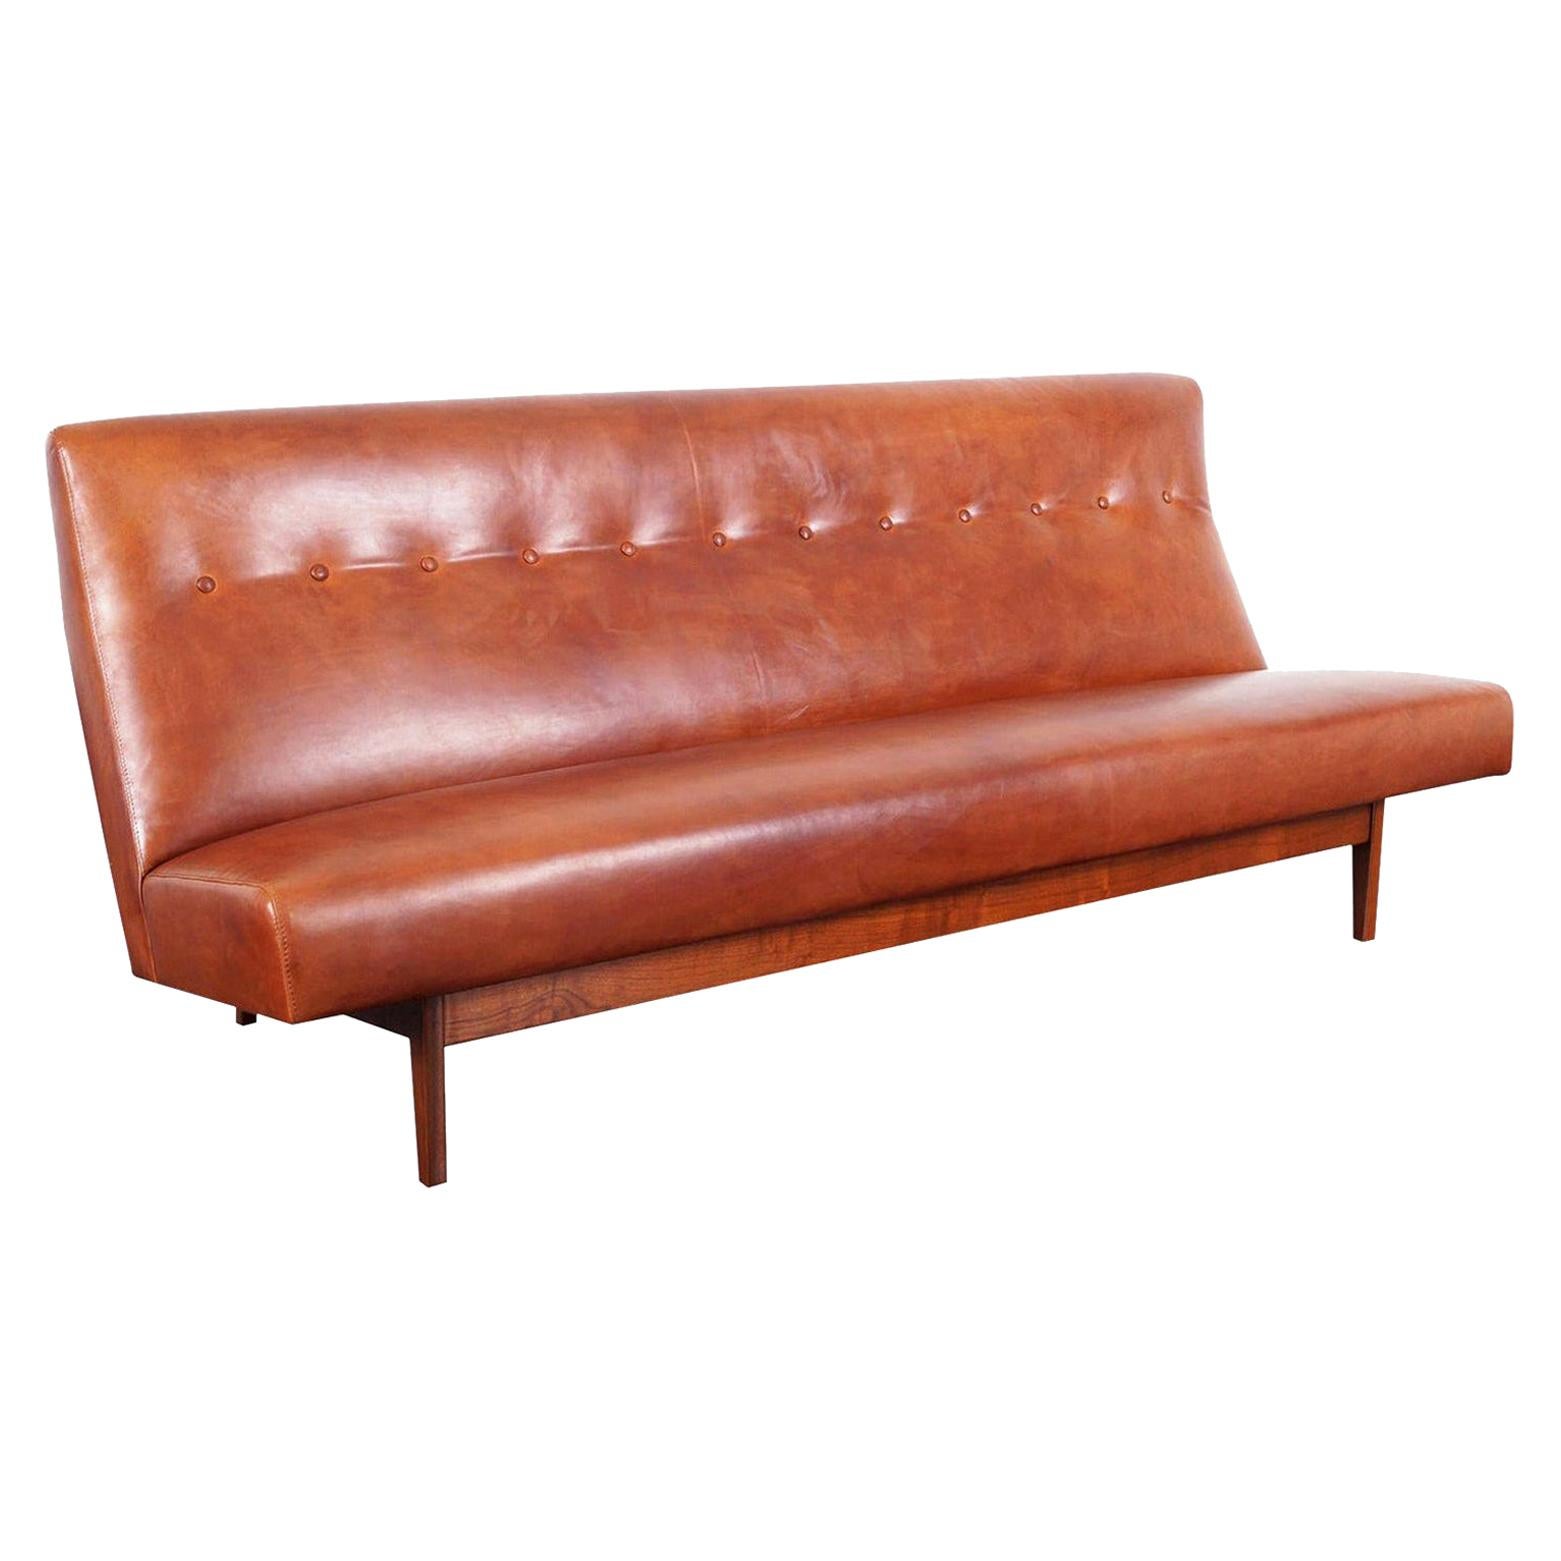 Vintage Leather and Walnut Sofa by Jens Risom